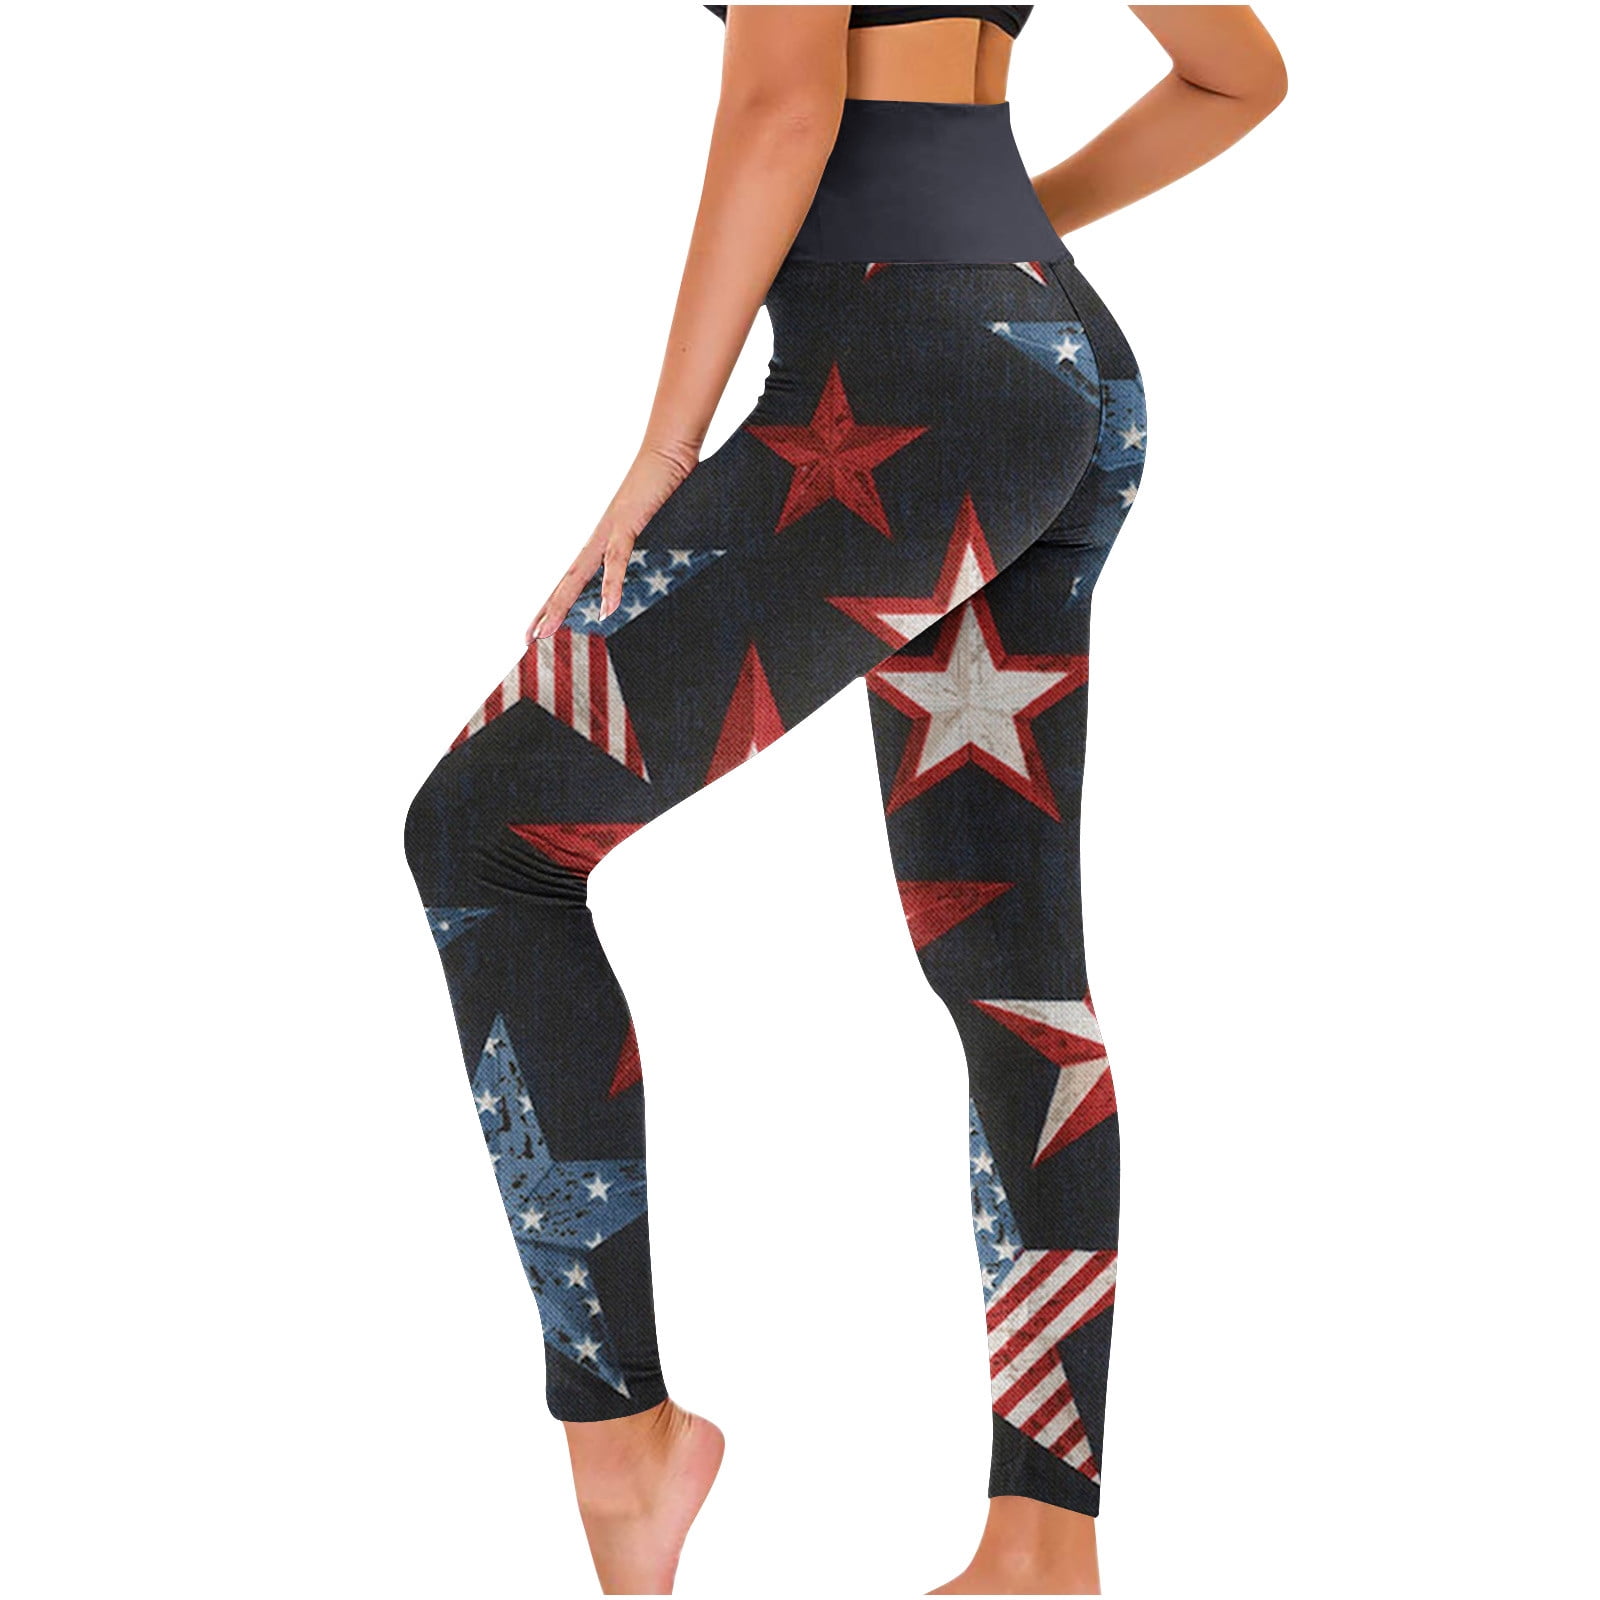 Gaecuw Stars and Stripes Leggings for Women Casual Yoga Pants High